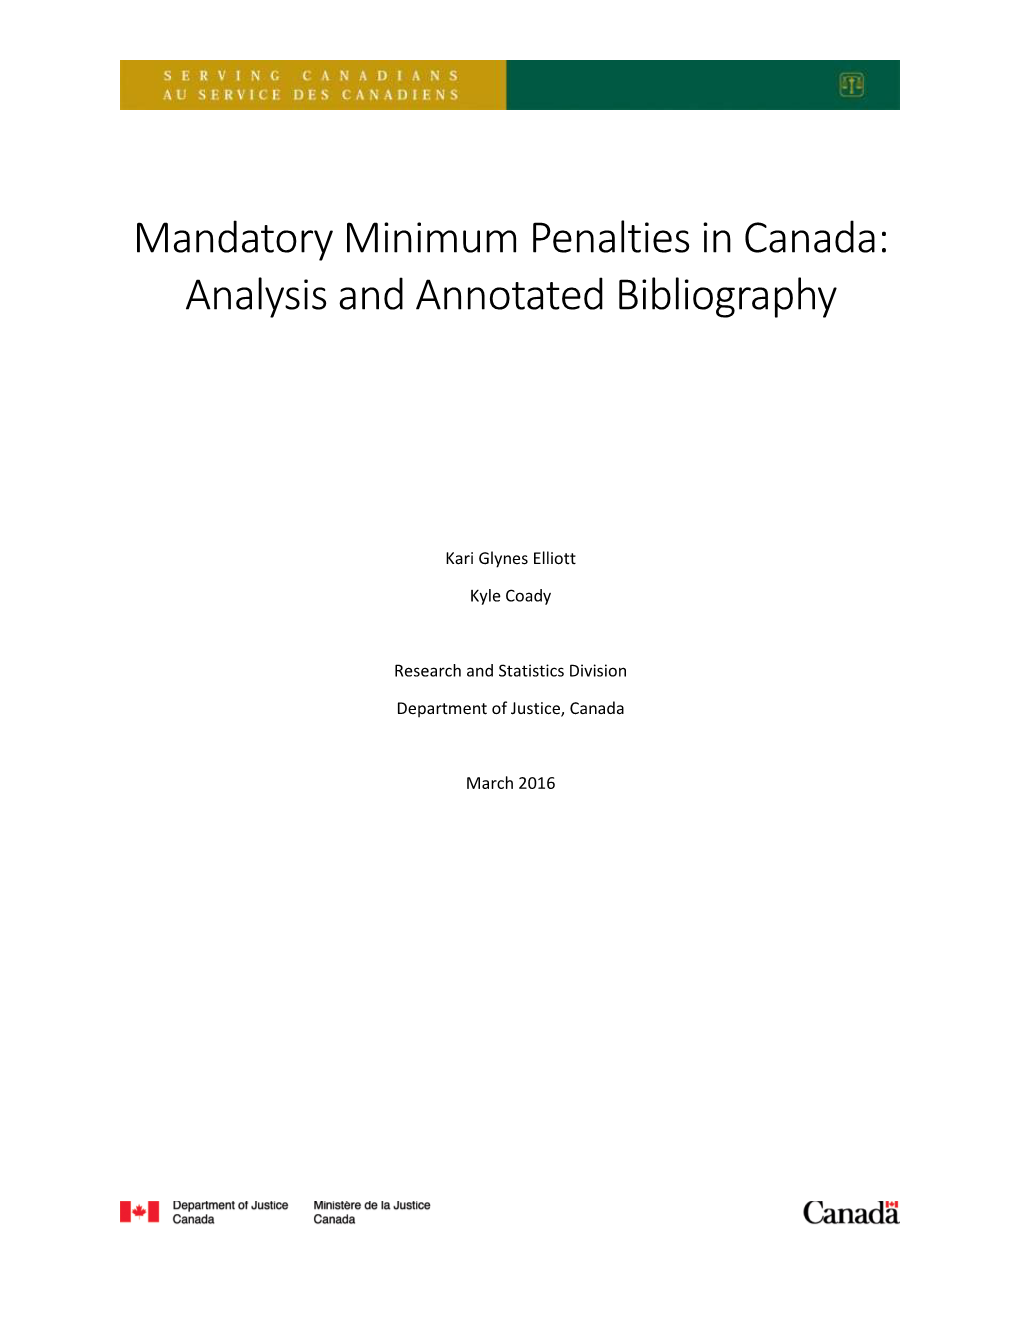 Mandatory Minimum Penalties in Canada: Analysis and Annotated Bibliography